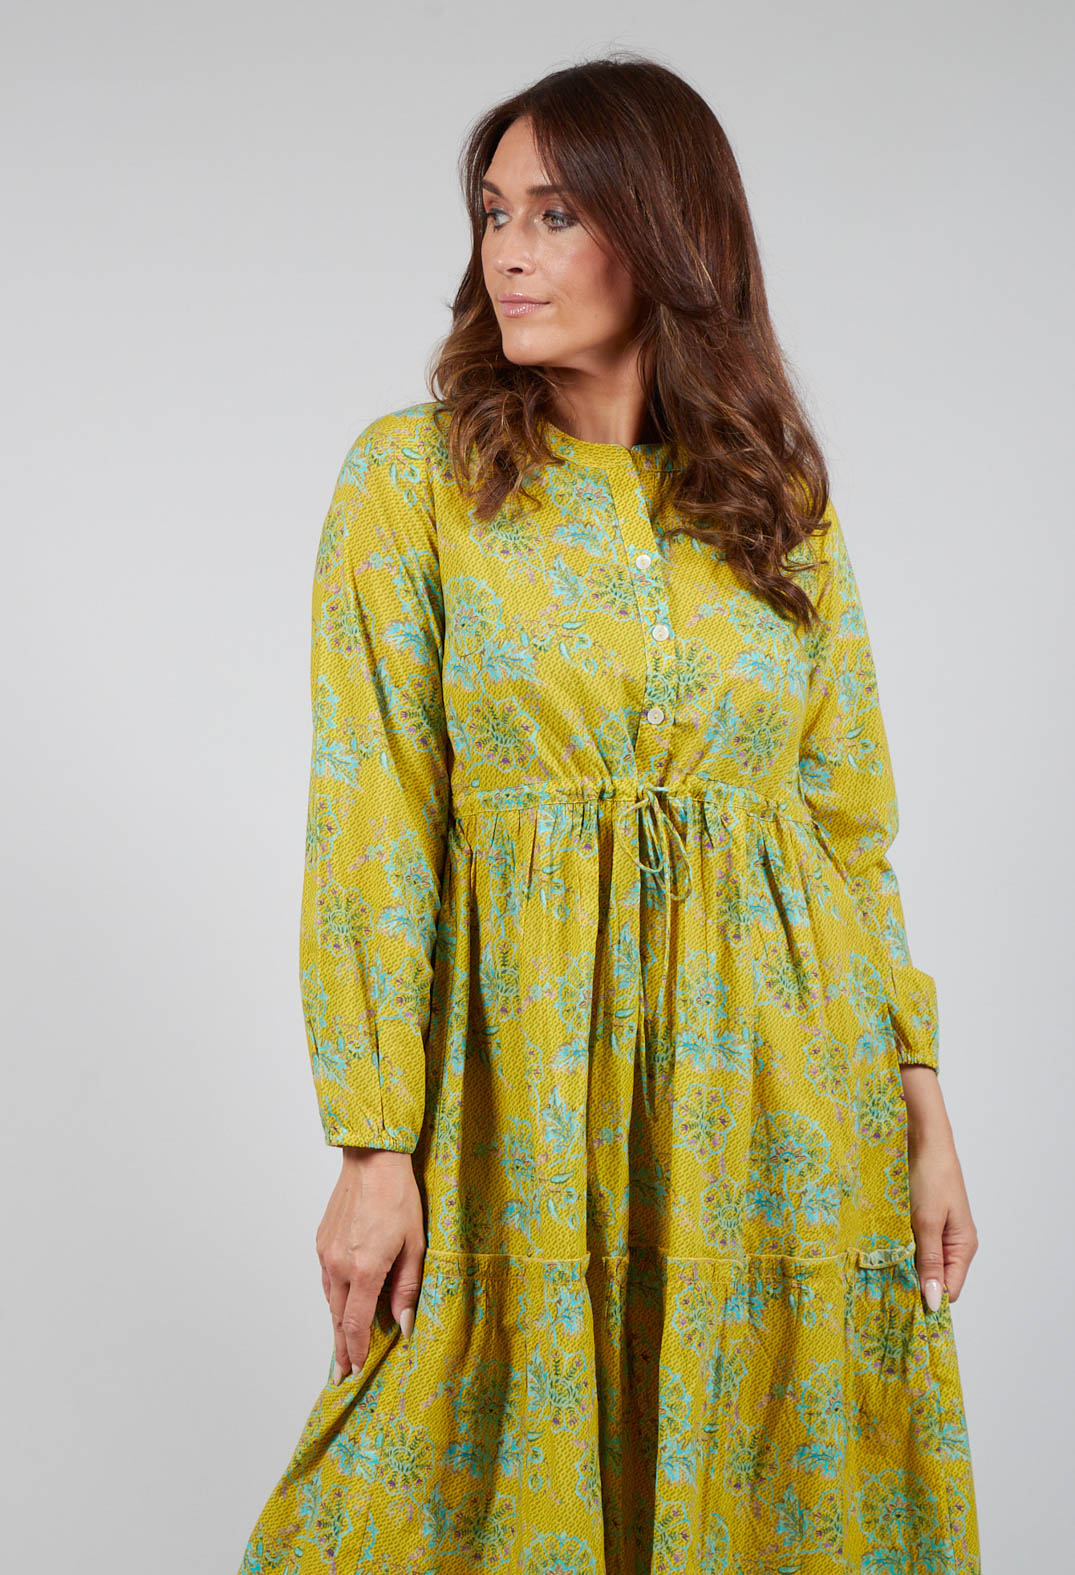 Tiered Valerie Dress in Yellow Floral Print